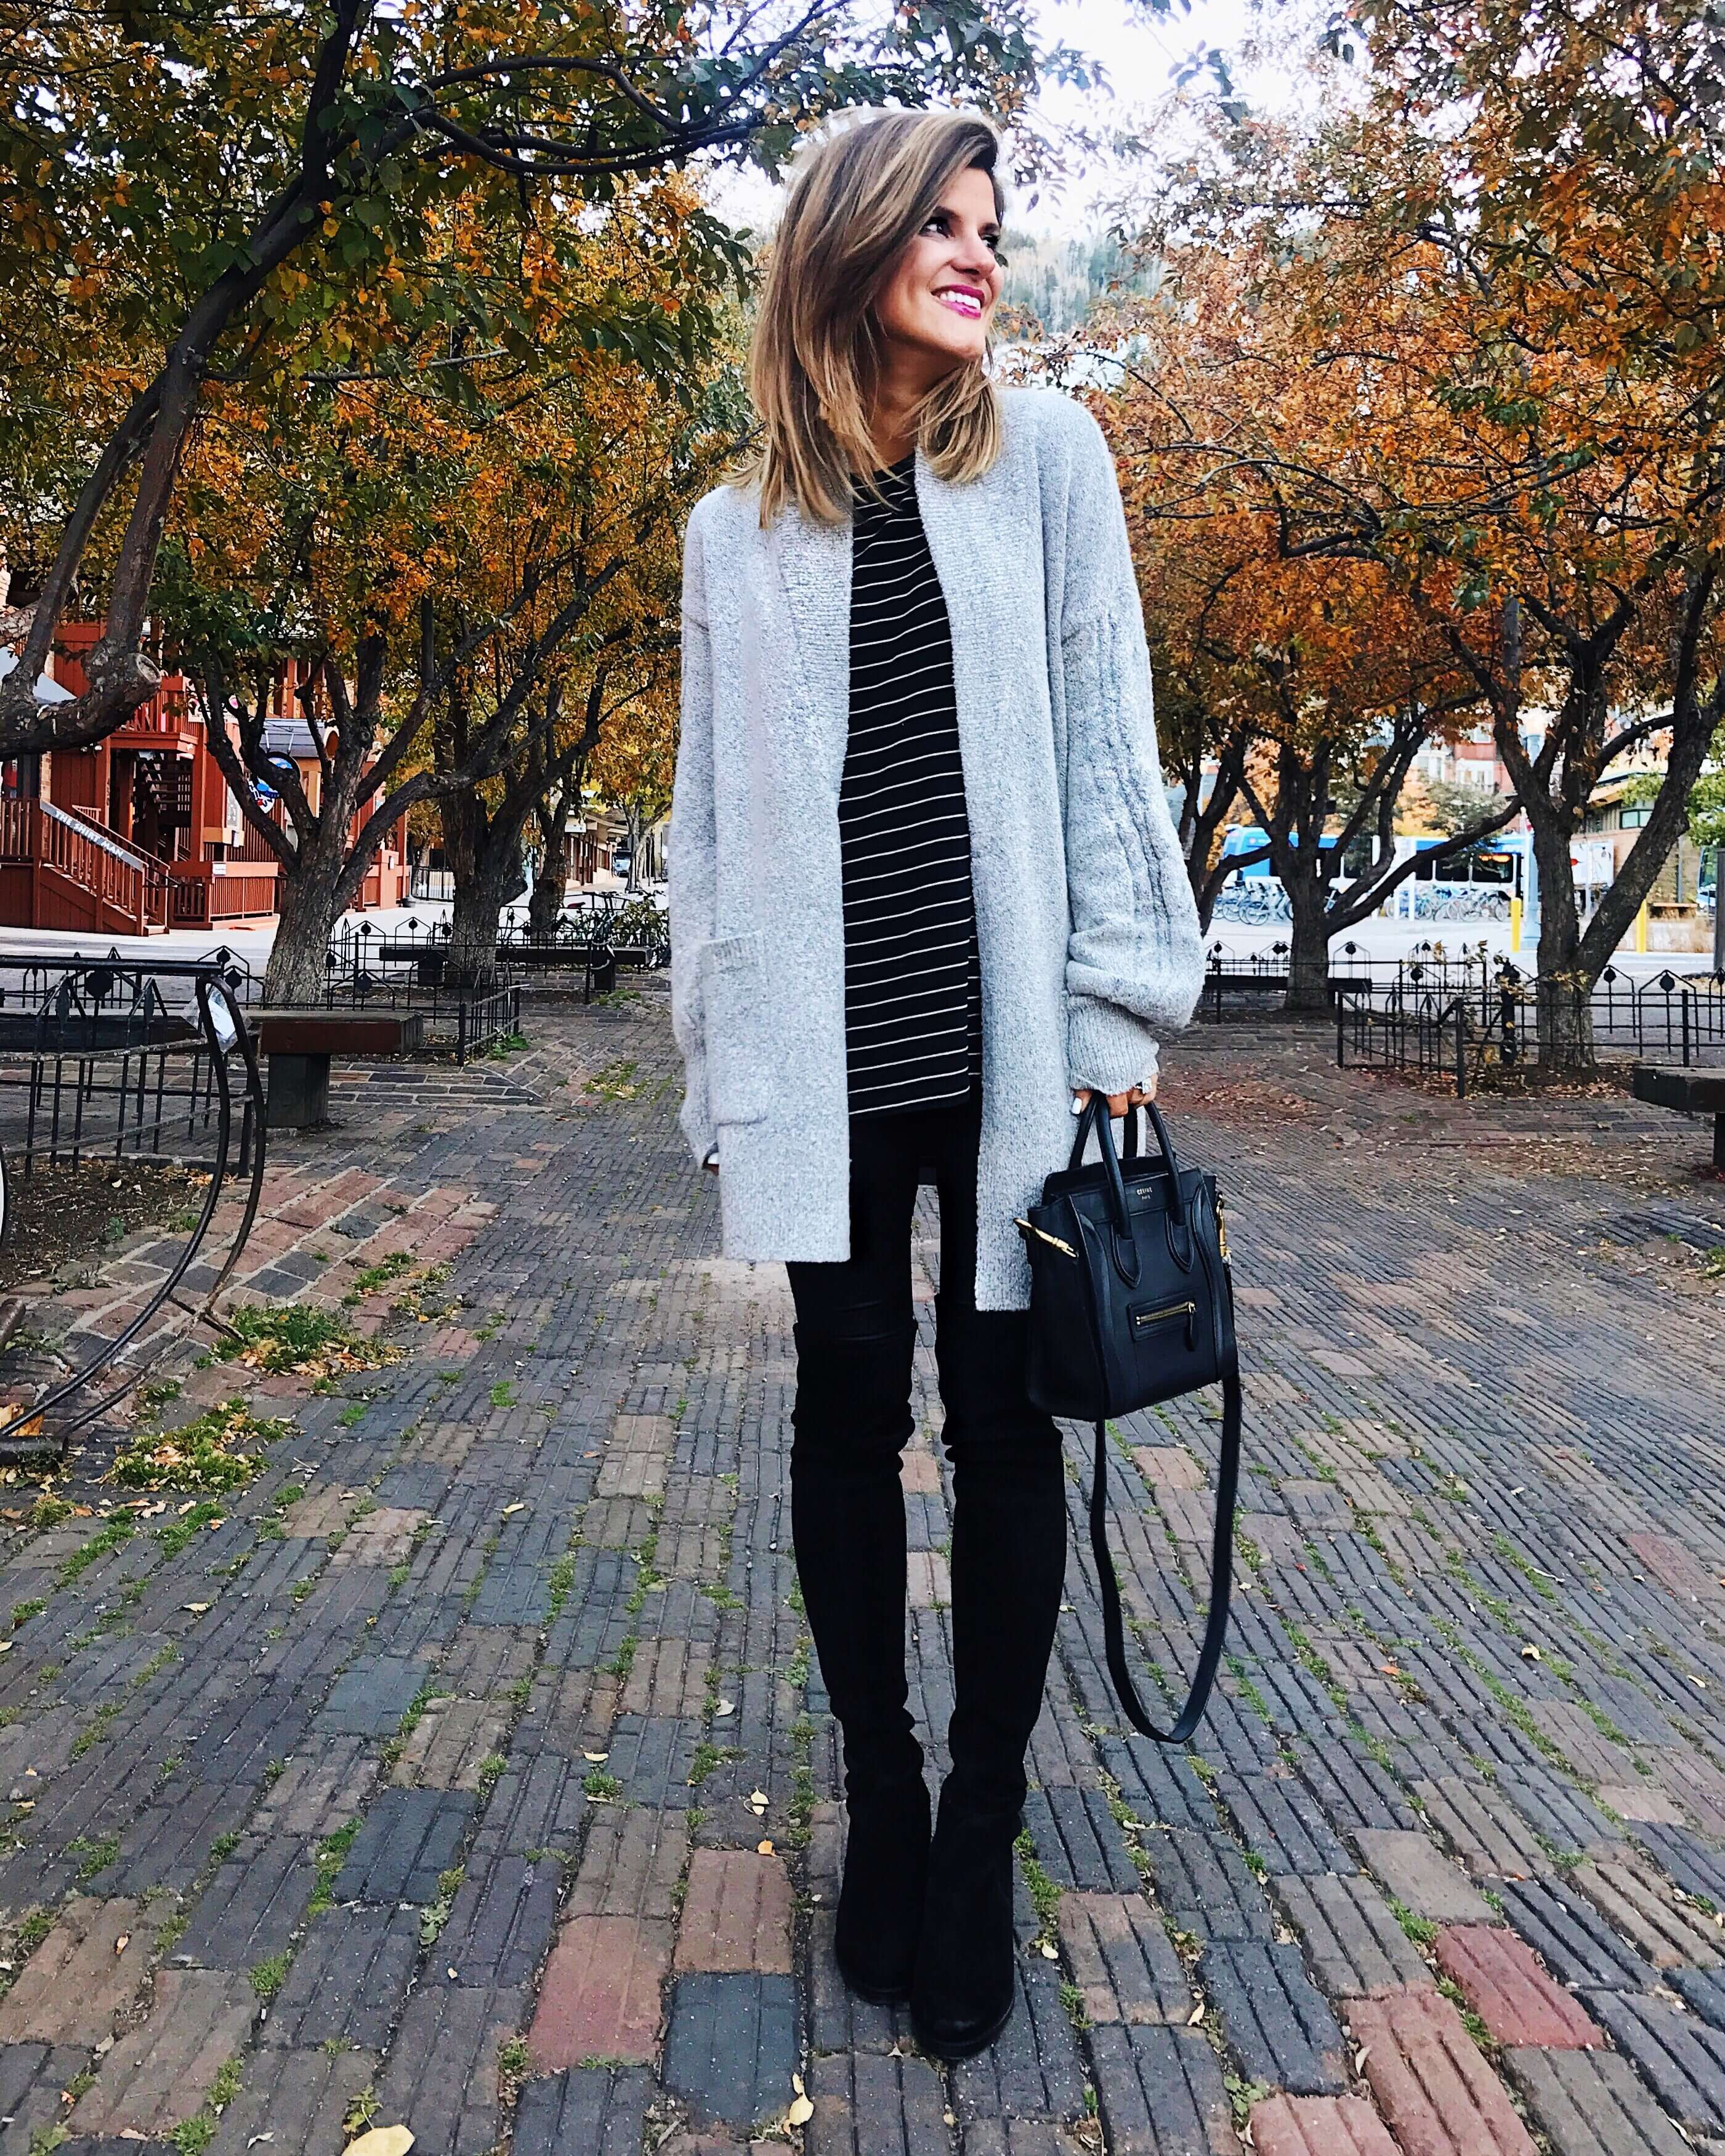 25 Winter Outfit Ideas • BrightonTheDay